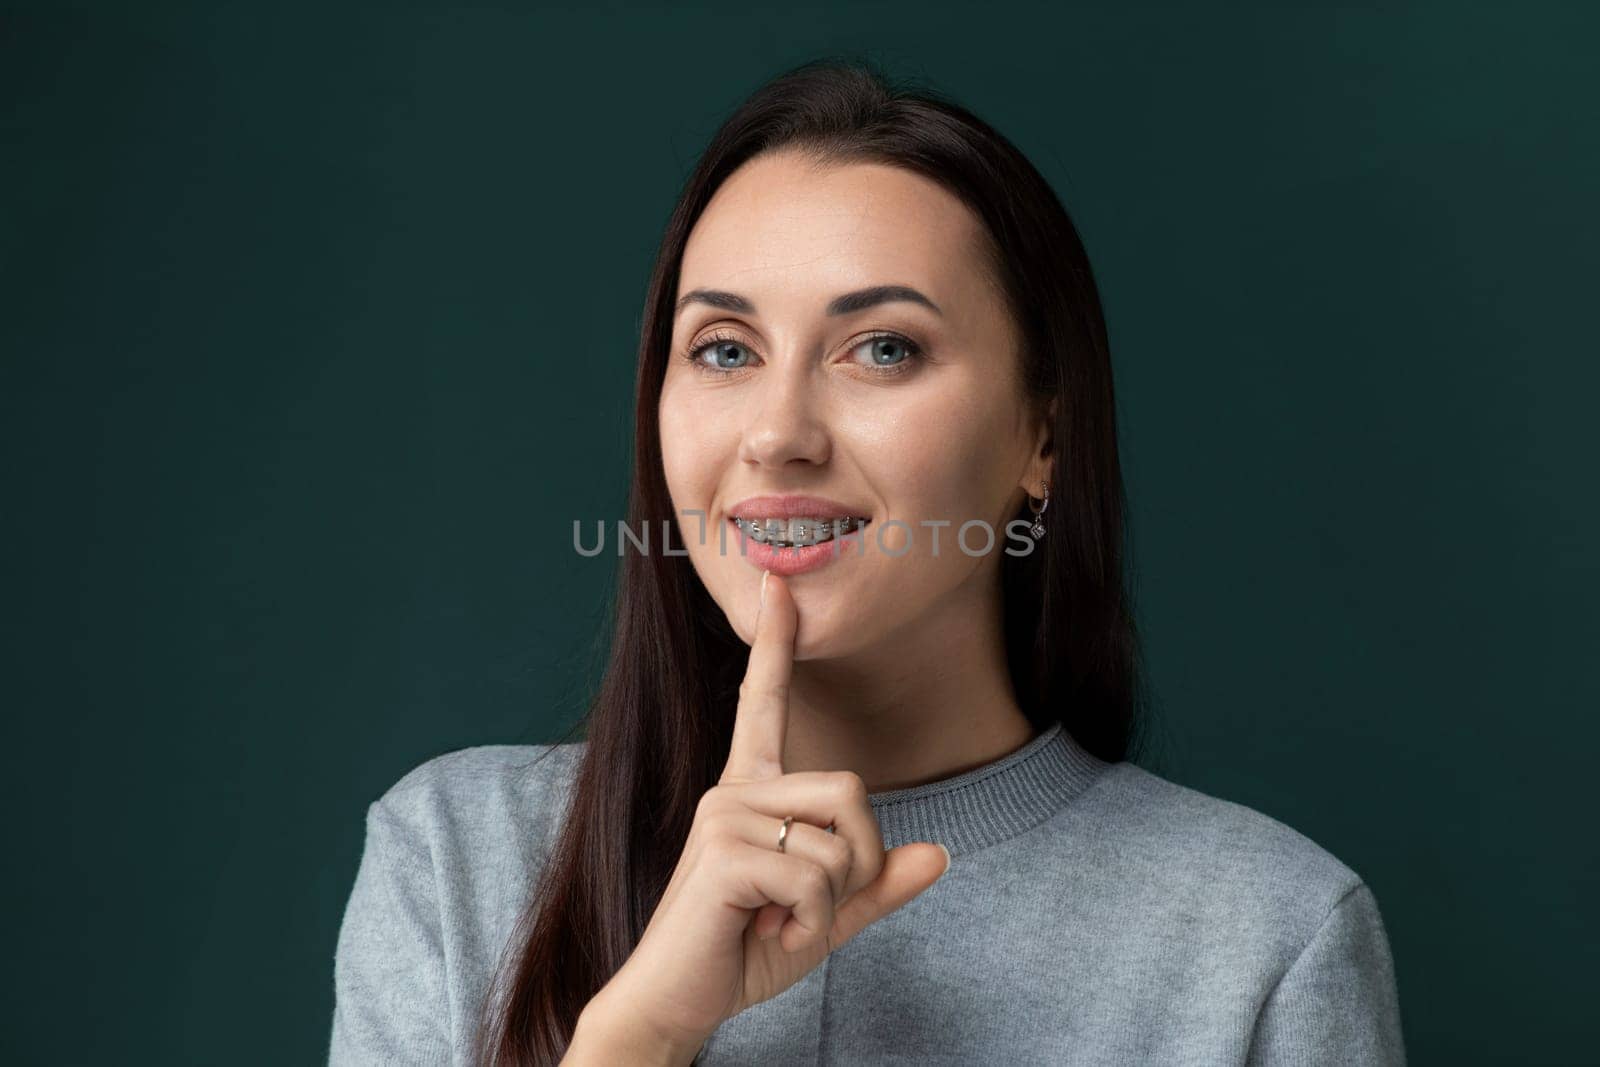 A woman holding a finger to her lips, signaling for silence or quietness. She appears to be asking for discretion or secrecy in a gesture commonly associated with keeping a secret or maintaining silence.